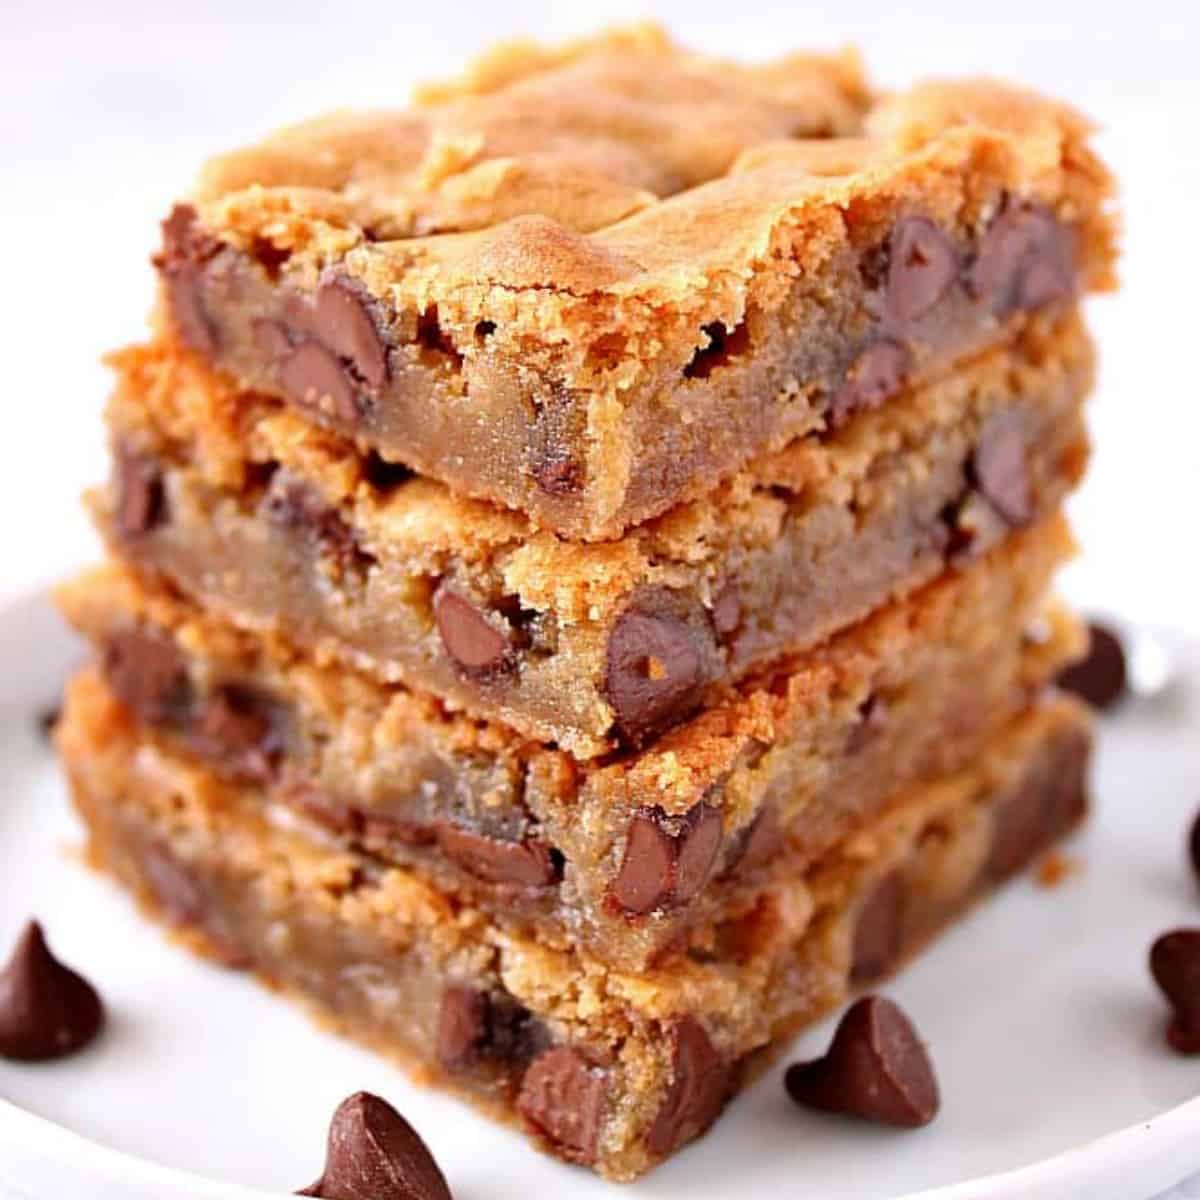 Blondie bars stacked on a plate.